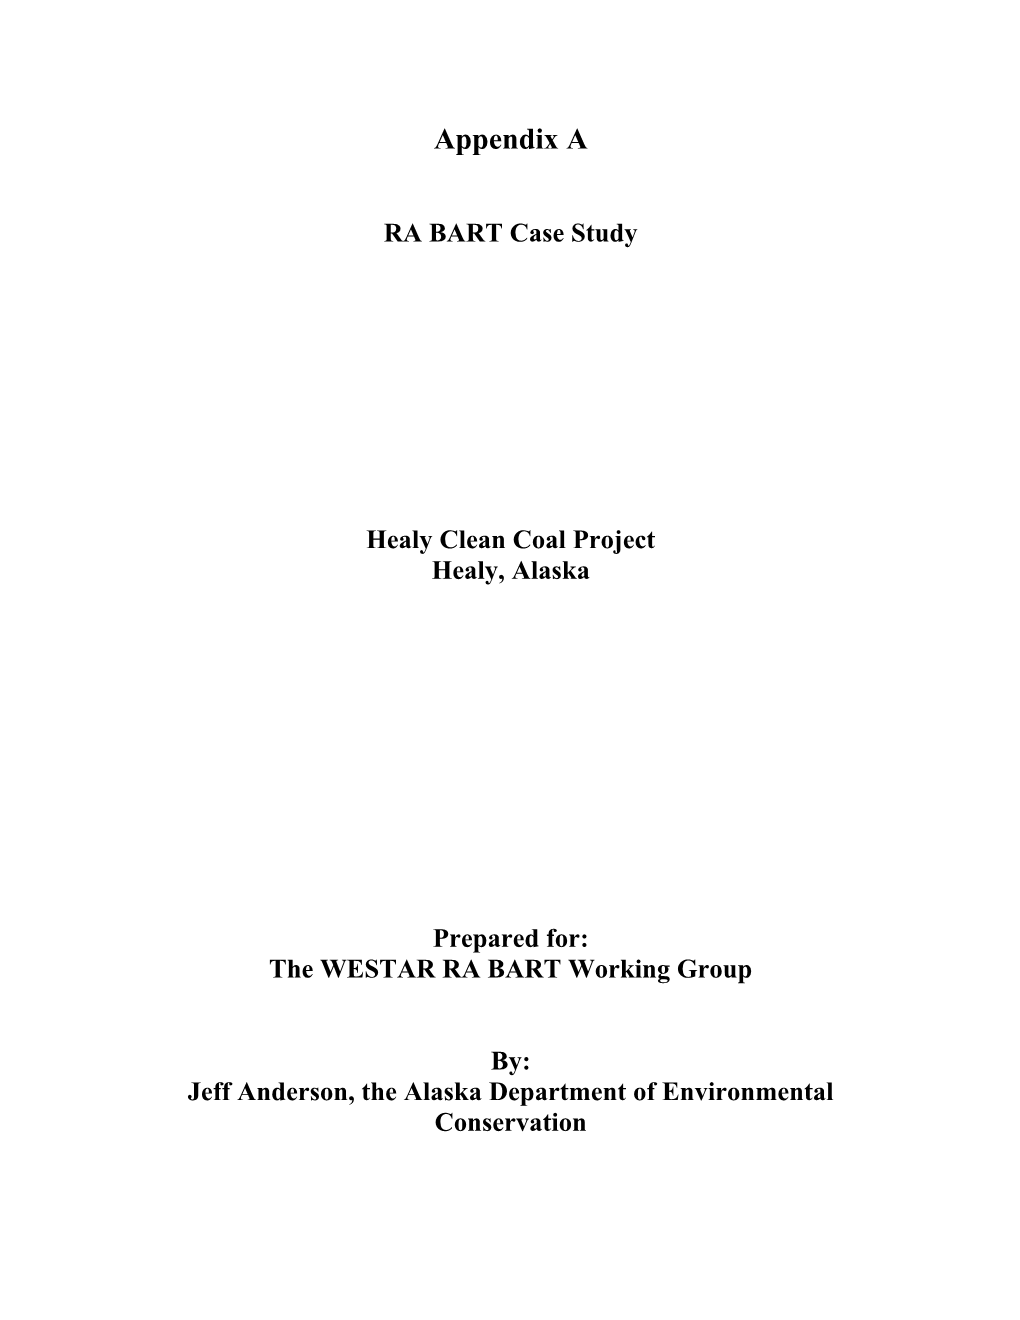 Healy Clean Coal Project